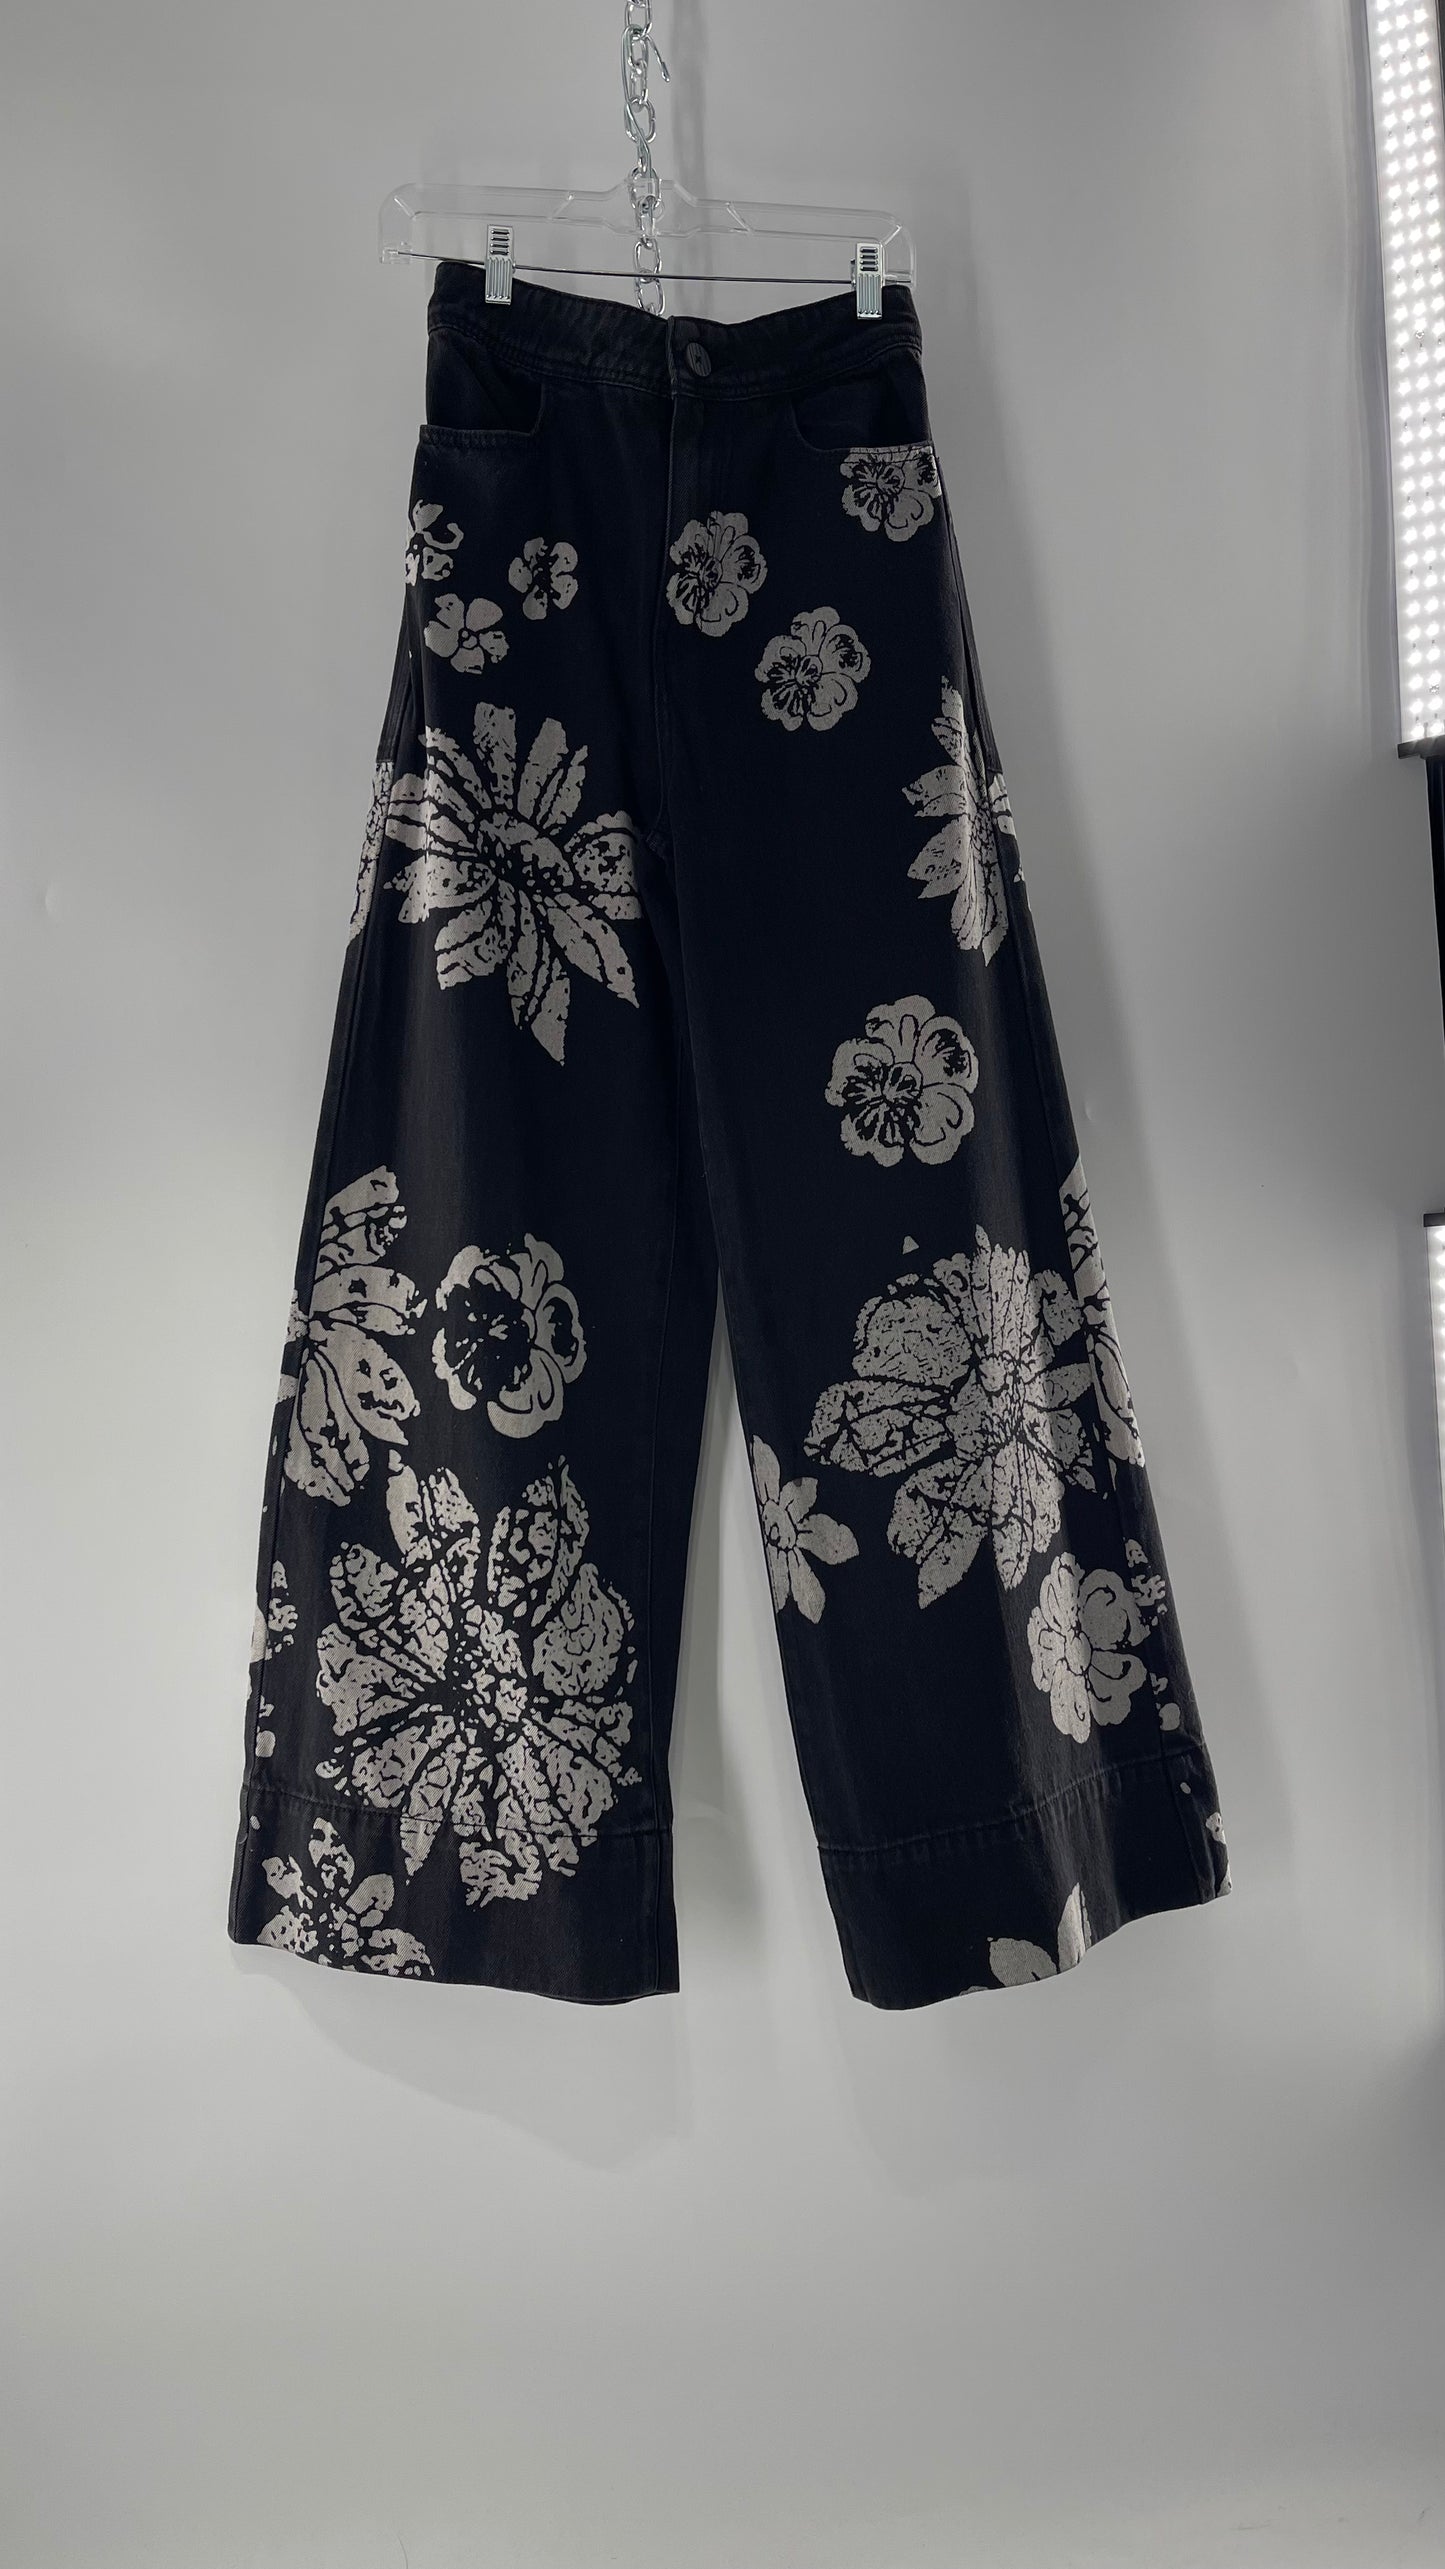 Free People Black Wide Leg Jeans with White Hibiscus Floral Design (29)